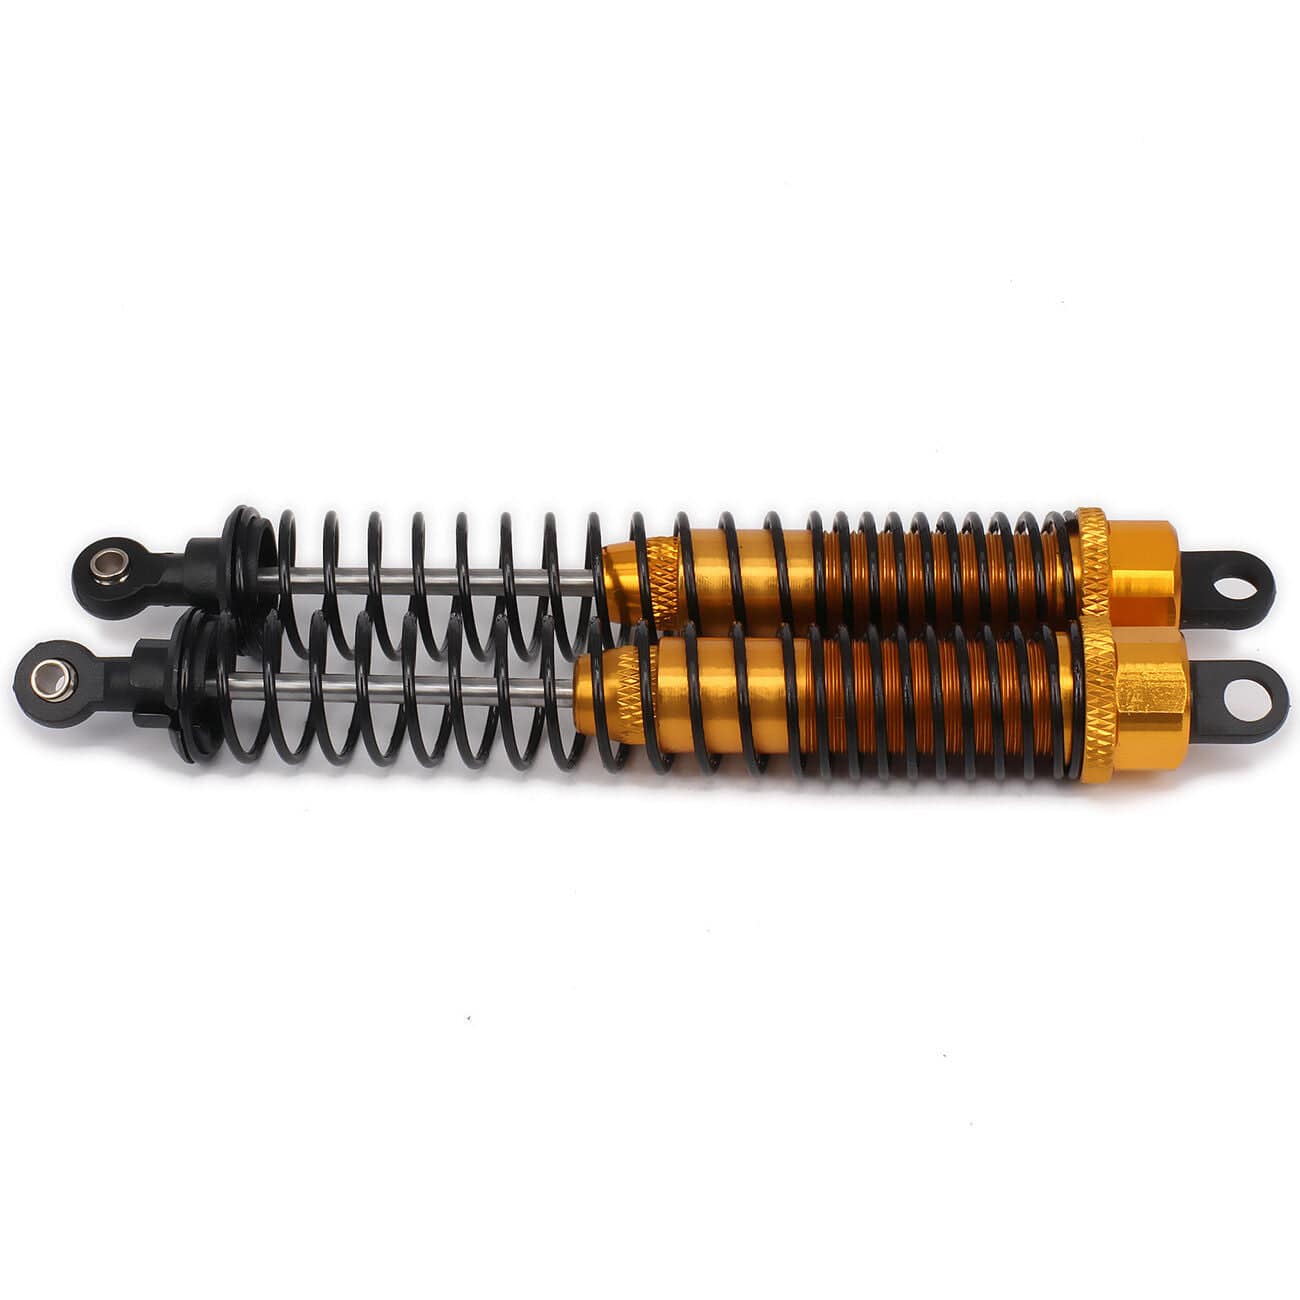 RCAWD RC CAR UPGRADE PARTS Yellow RCAWD Adjustable 130mm RC Shock Absorber Damper For RC Car 1/10 Model Car 2PCS